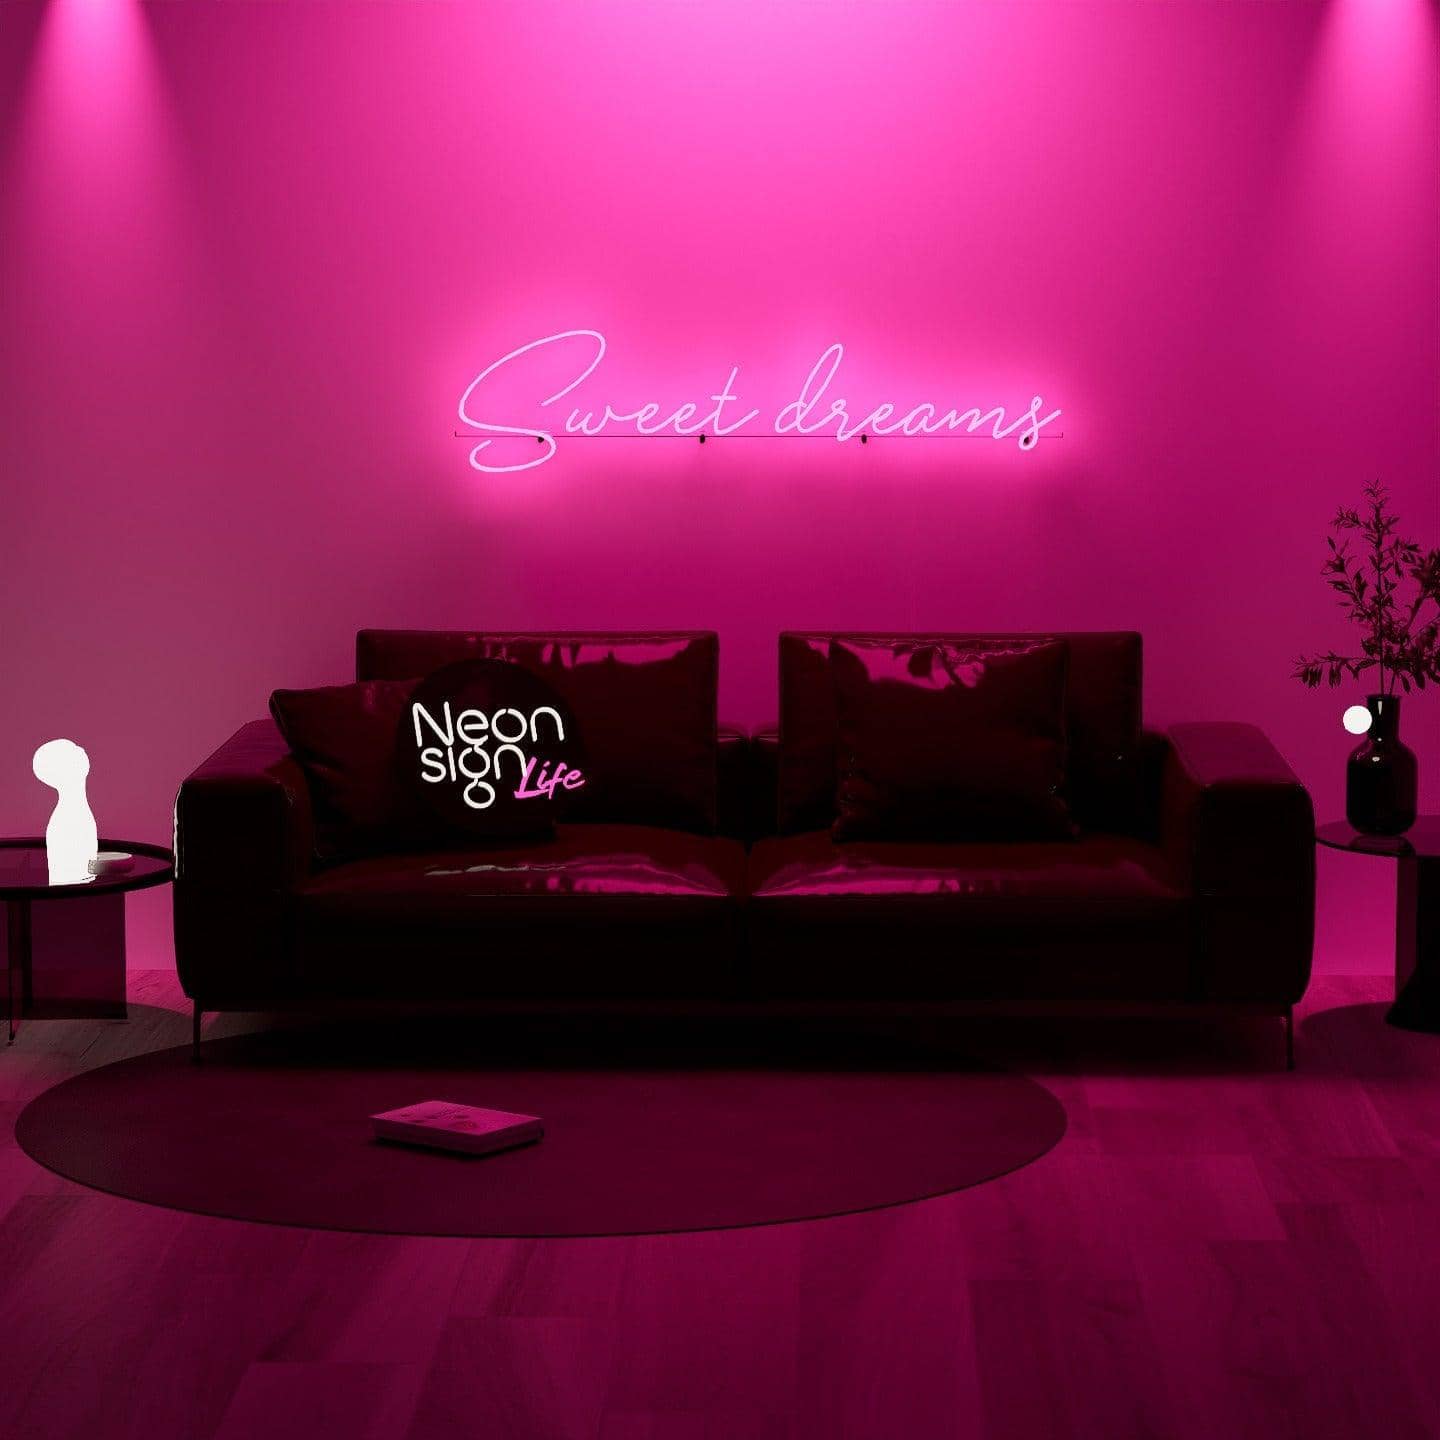 dark-night-lit-pink-neon-lights-hanging-on-the-wall-for-display-sweet-dreams